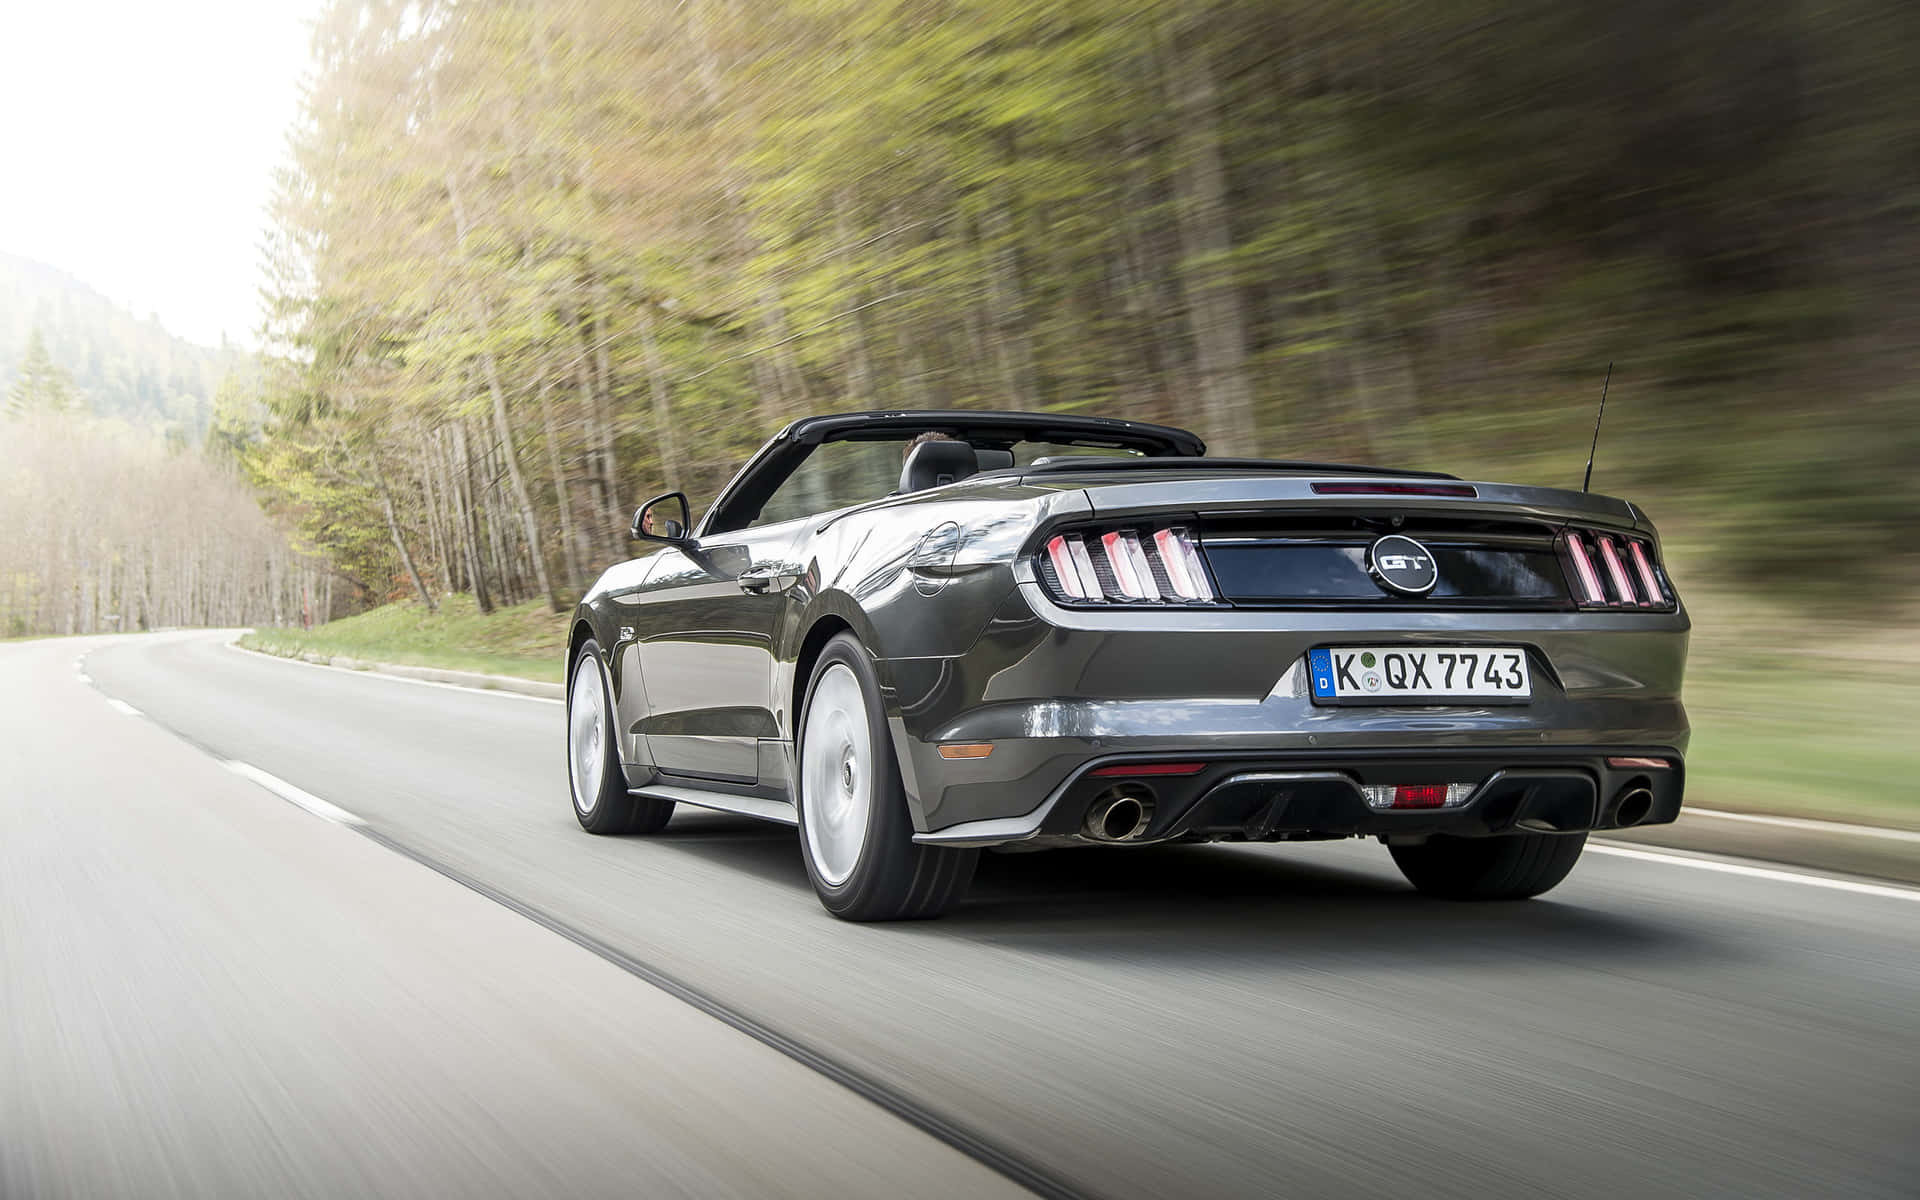 Caption: Majestic Ford Mustang Gt Convertible On The Street Wallpaper